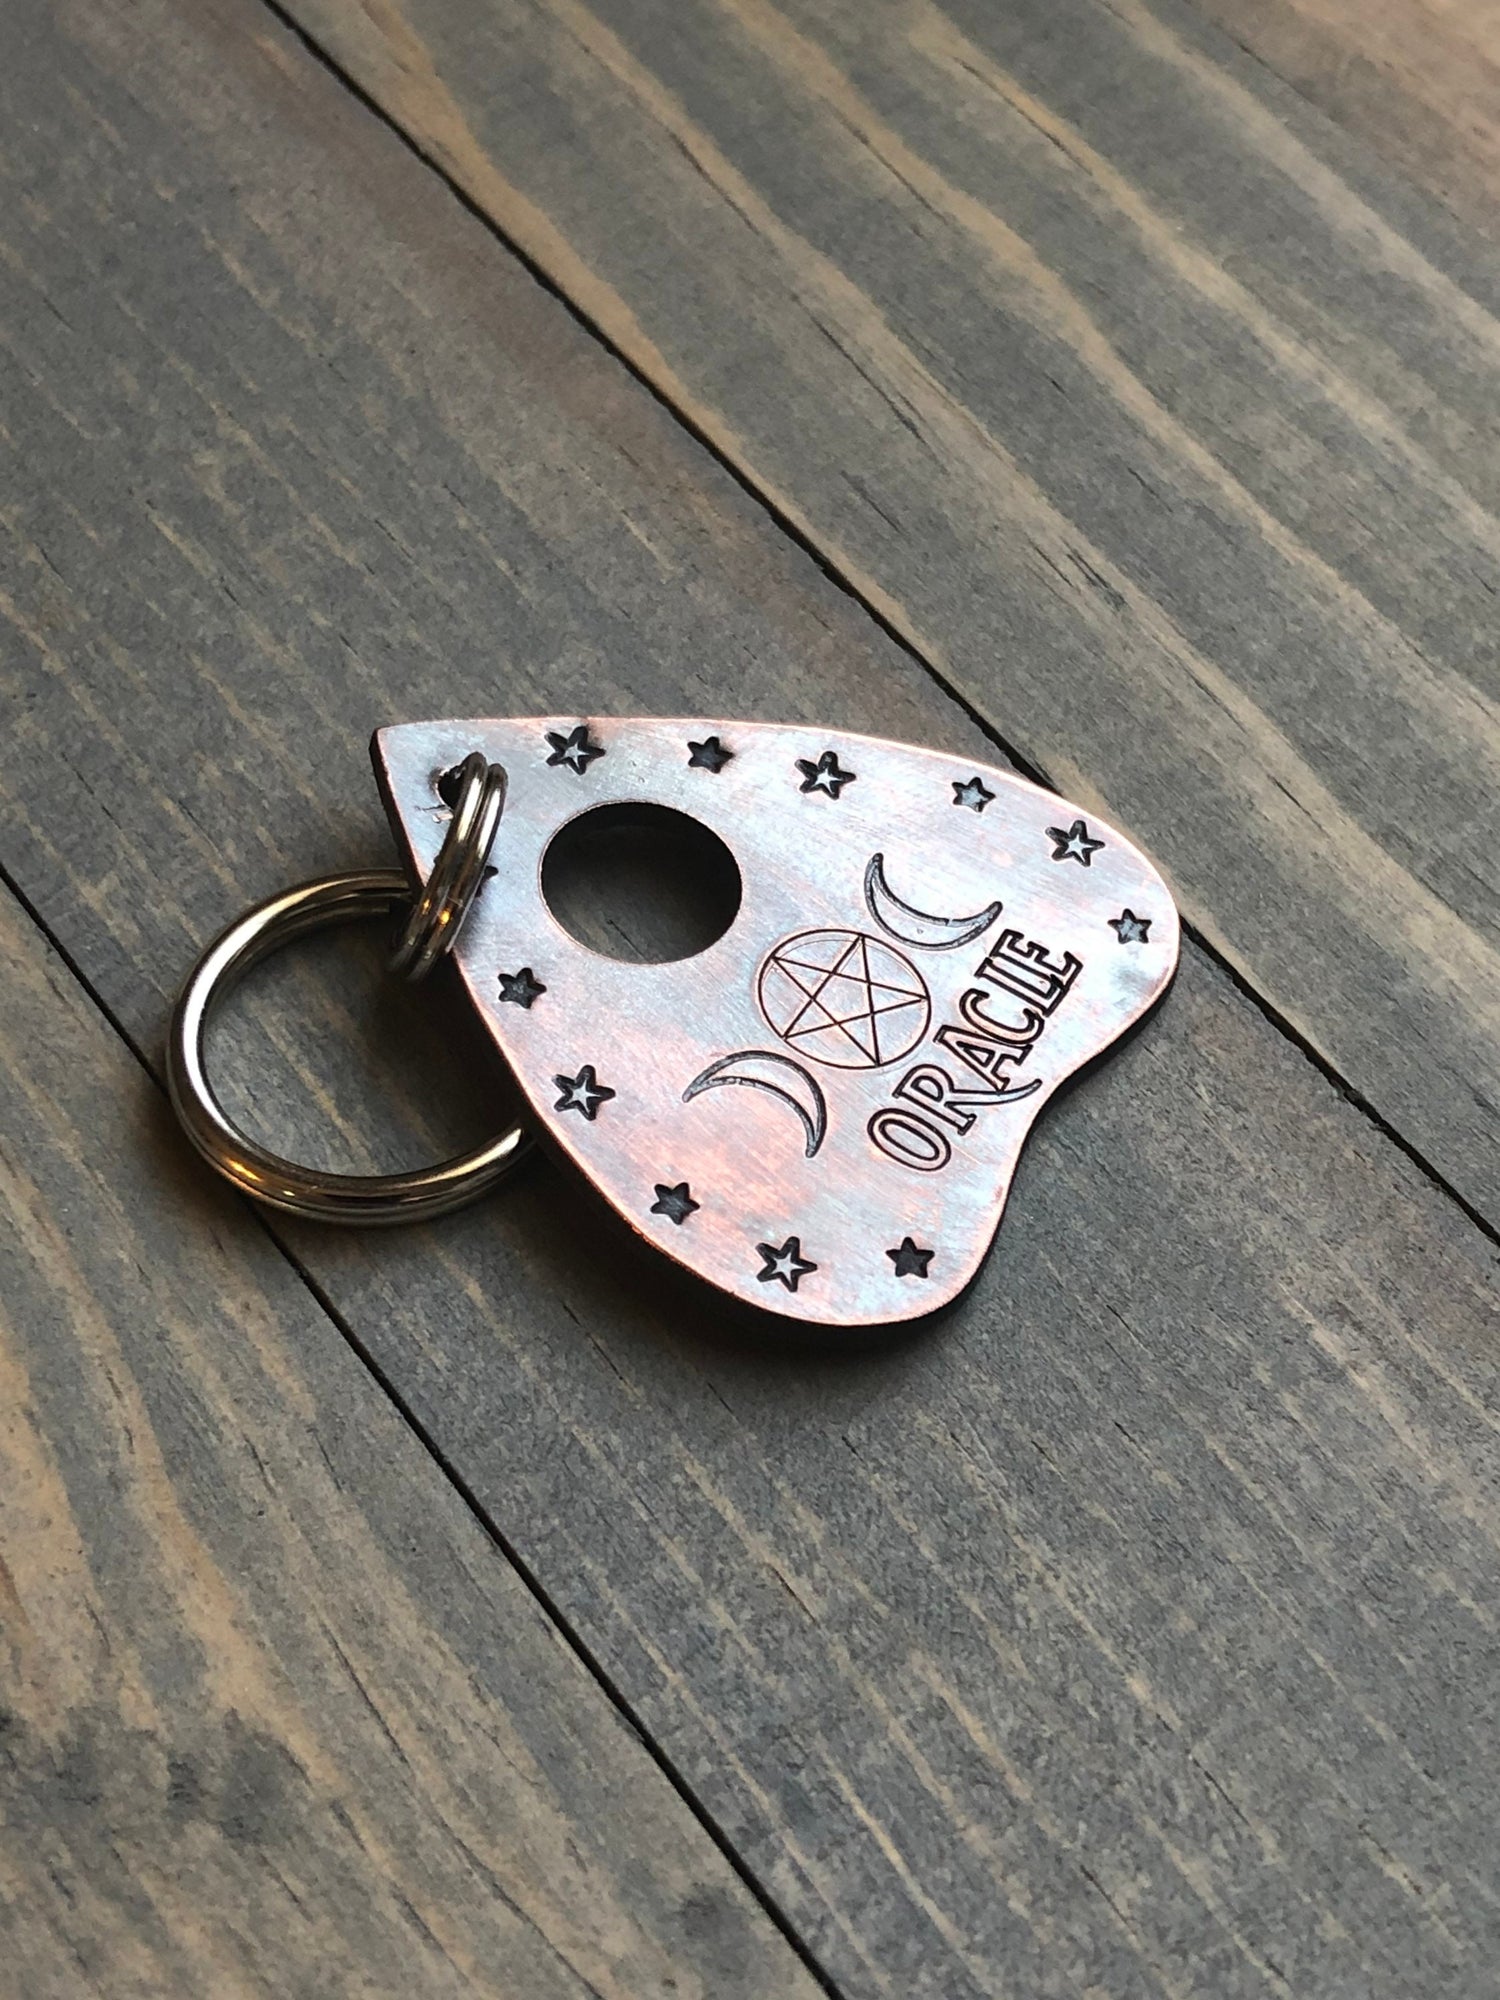 Planchette Dog Tag, Hand Stamped, Personalized Dog Tag for Dog, Halloween Collar Tag, Tag with Pentagram, Tag with Moon and Stars, Oracle